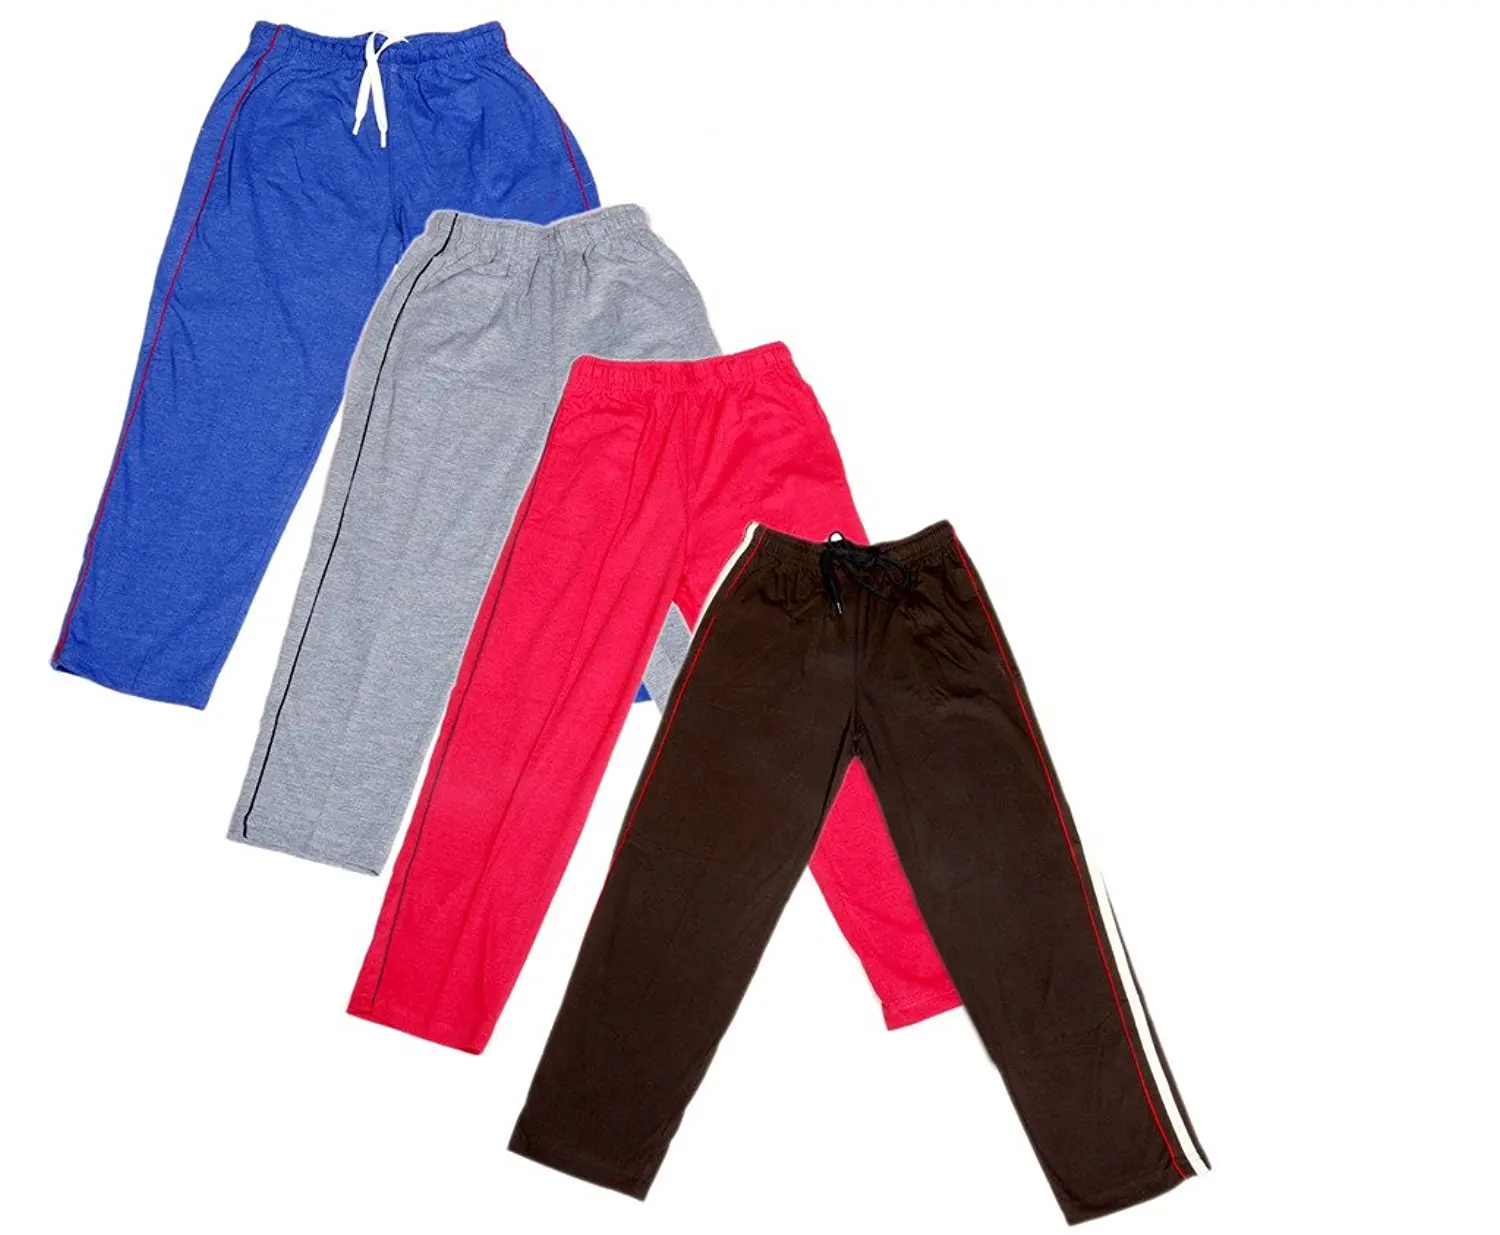 Pack Of 3 Indistar Boys Premium Cotton Full Length Lower//Track Pants//Pyjamas With 2 Open Pockets